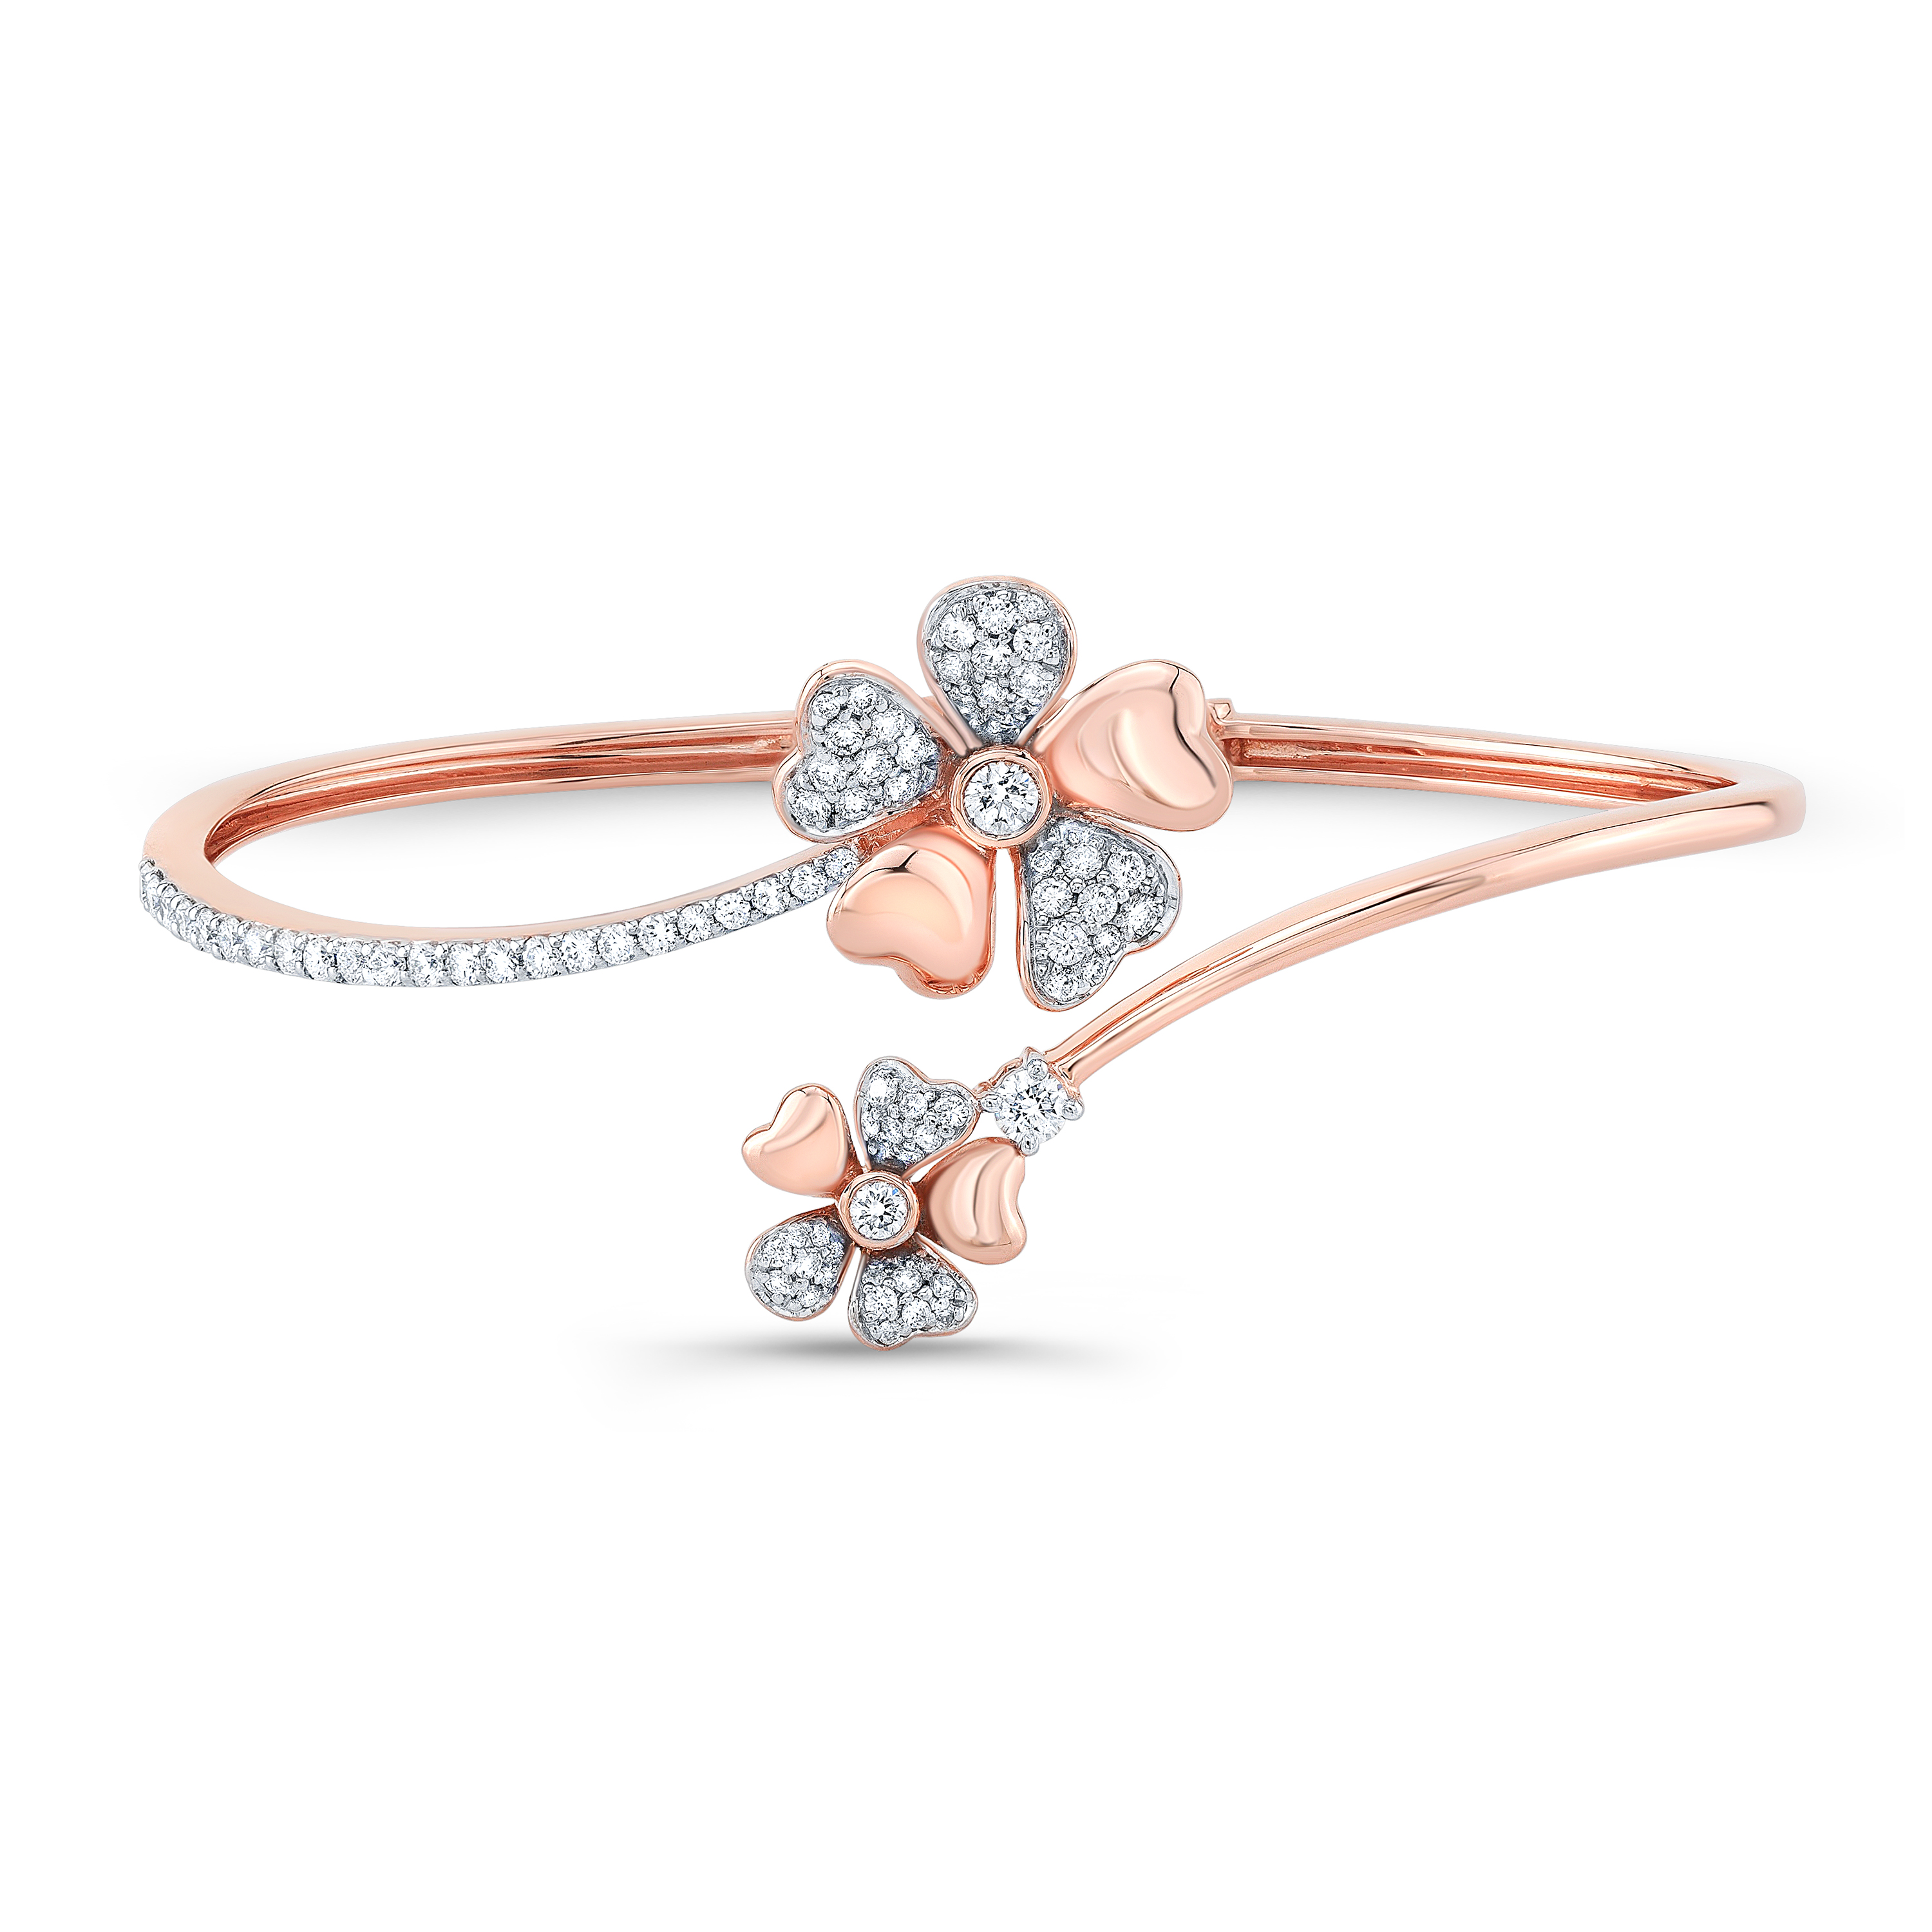 Lucky Fish Bracelet with Diamond Bezel 18K Gold | The Private Room Jewelry Rose